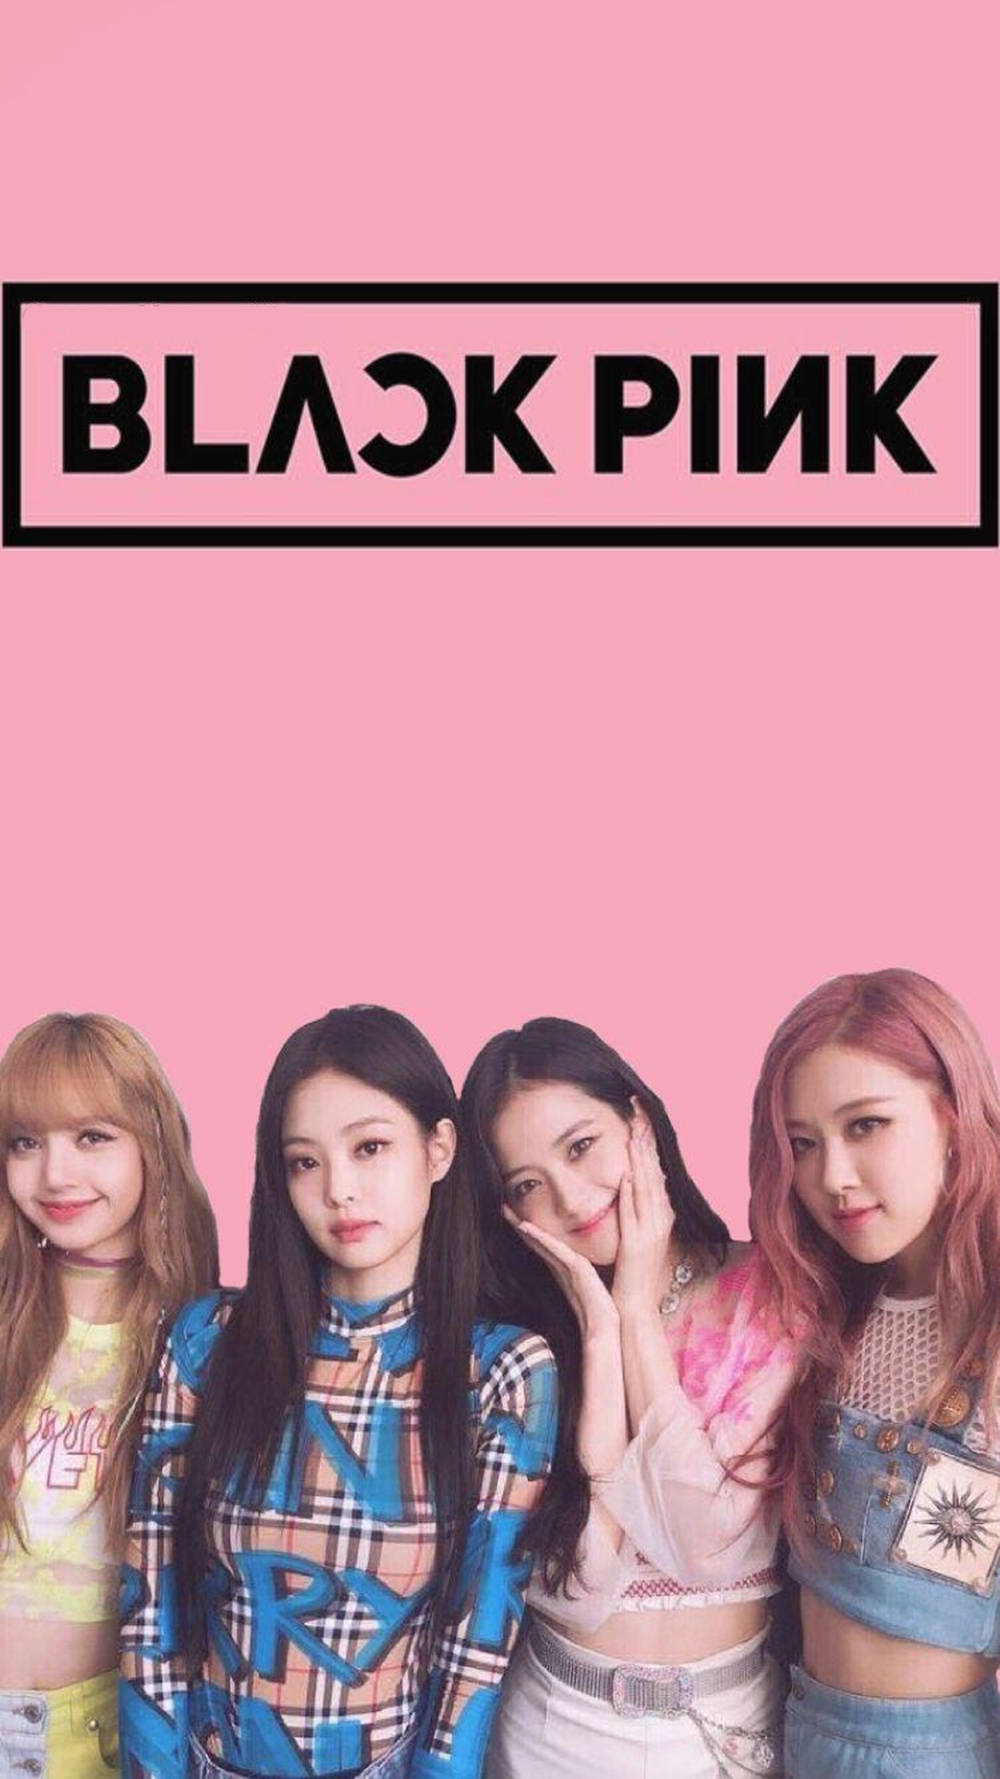 Blackpink Cute Group Photo Background